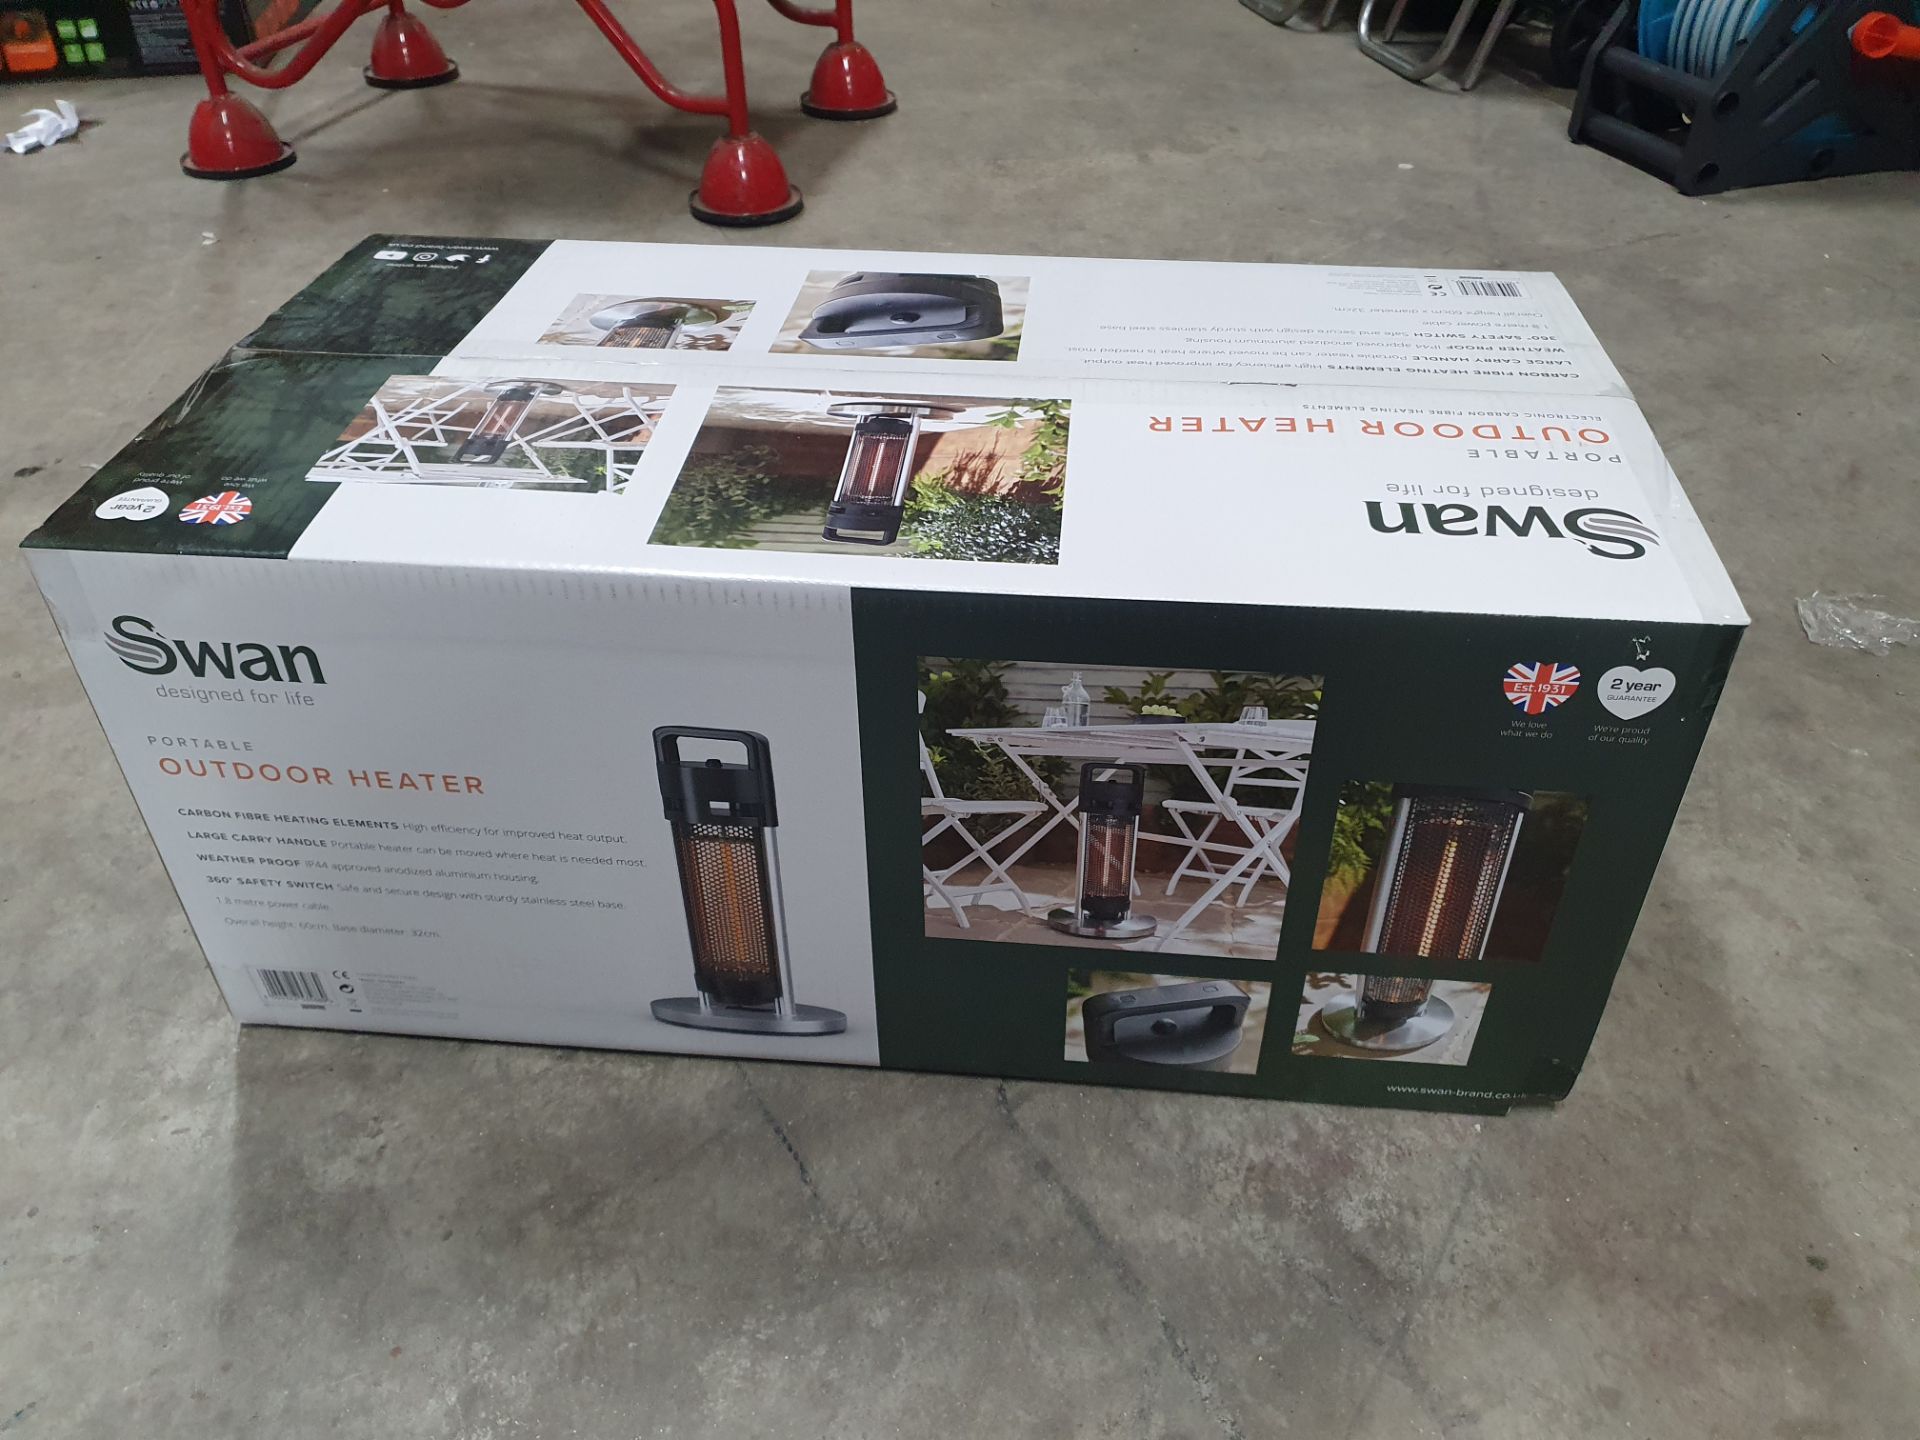 * Swan portable outdoor heater RRP £100 - Image 2 of 3